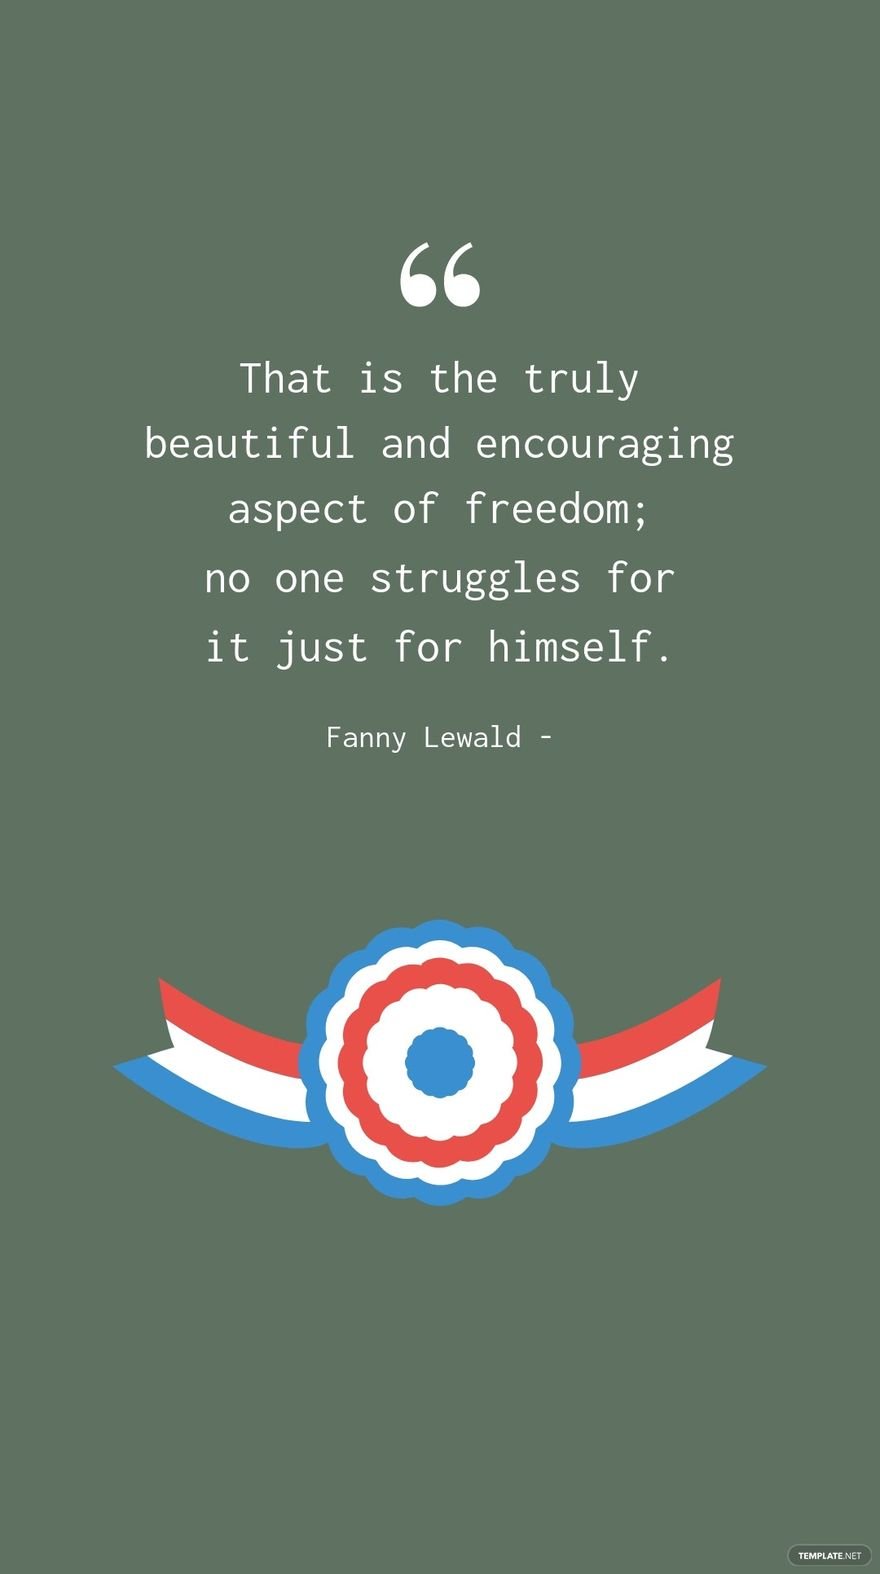 Fanny Lewald - That is the truly beautiful and encouraging aspect of freedom; no one struggles for it just for himself.